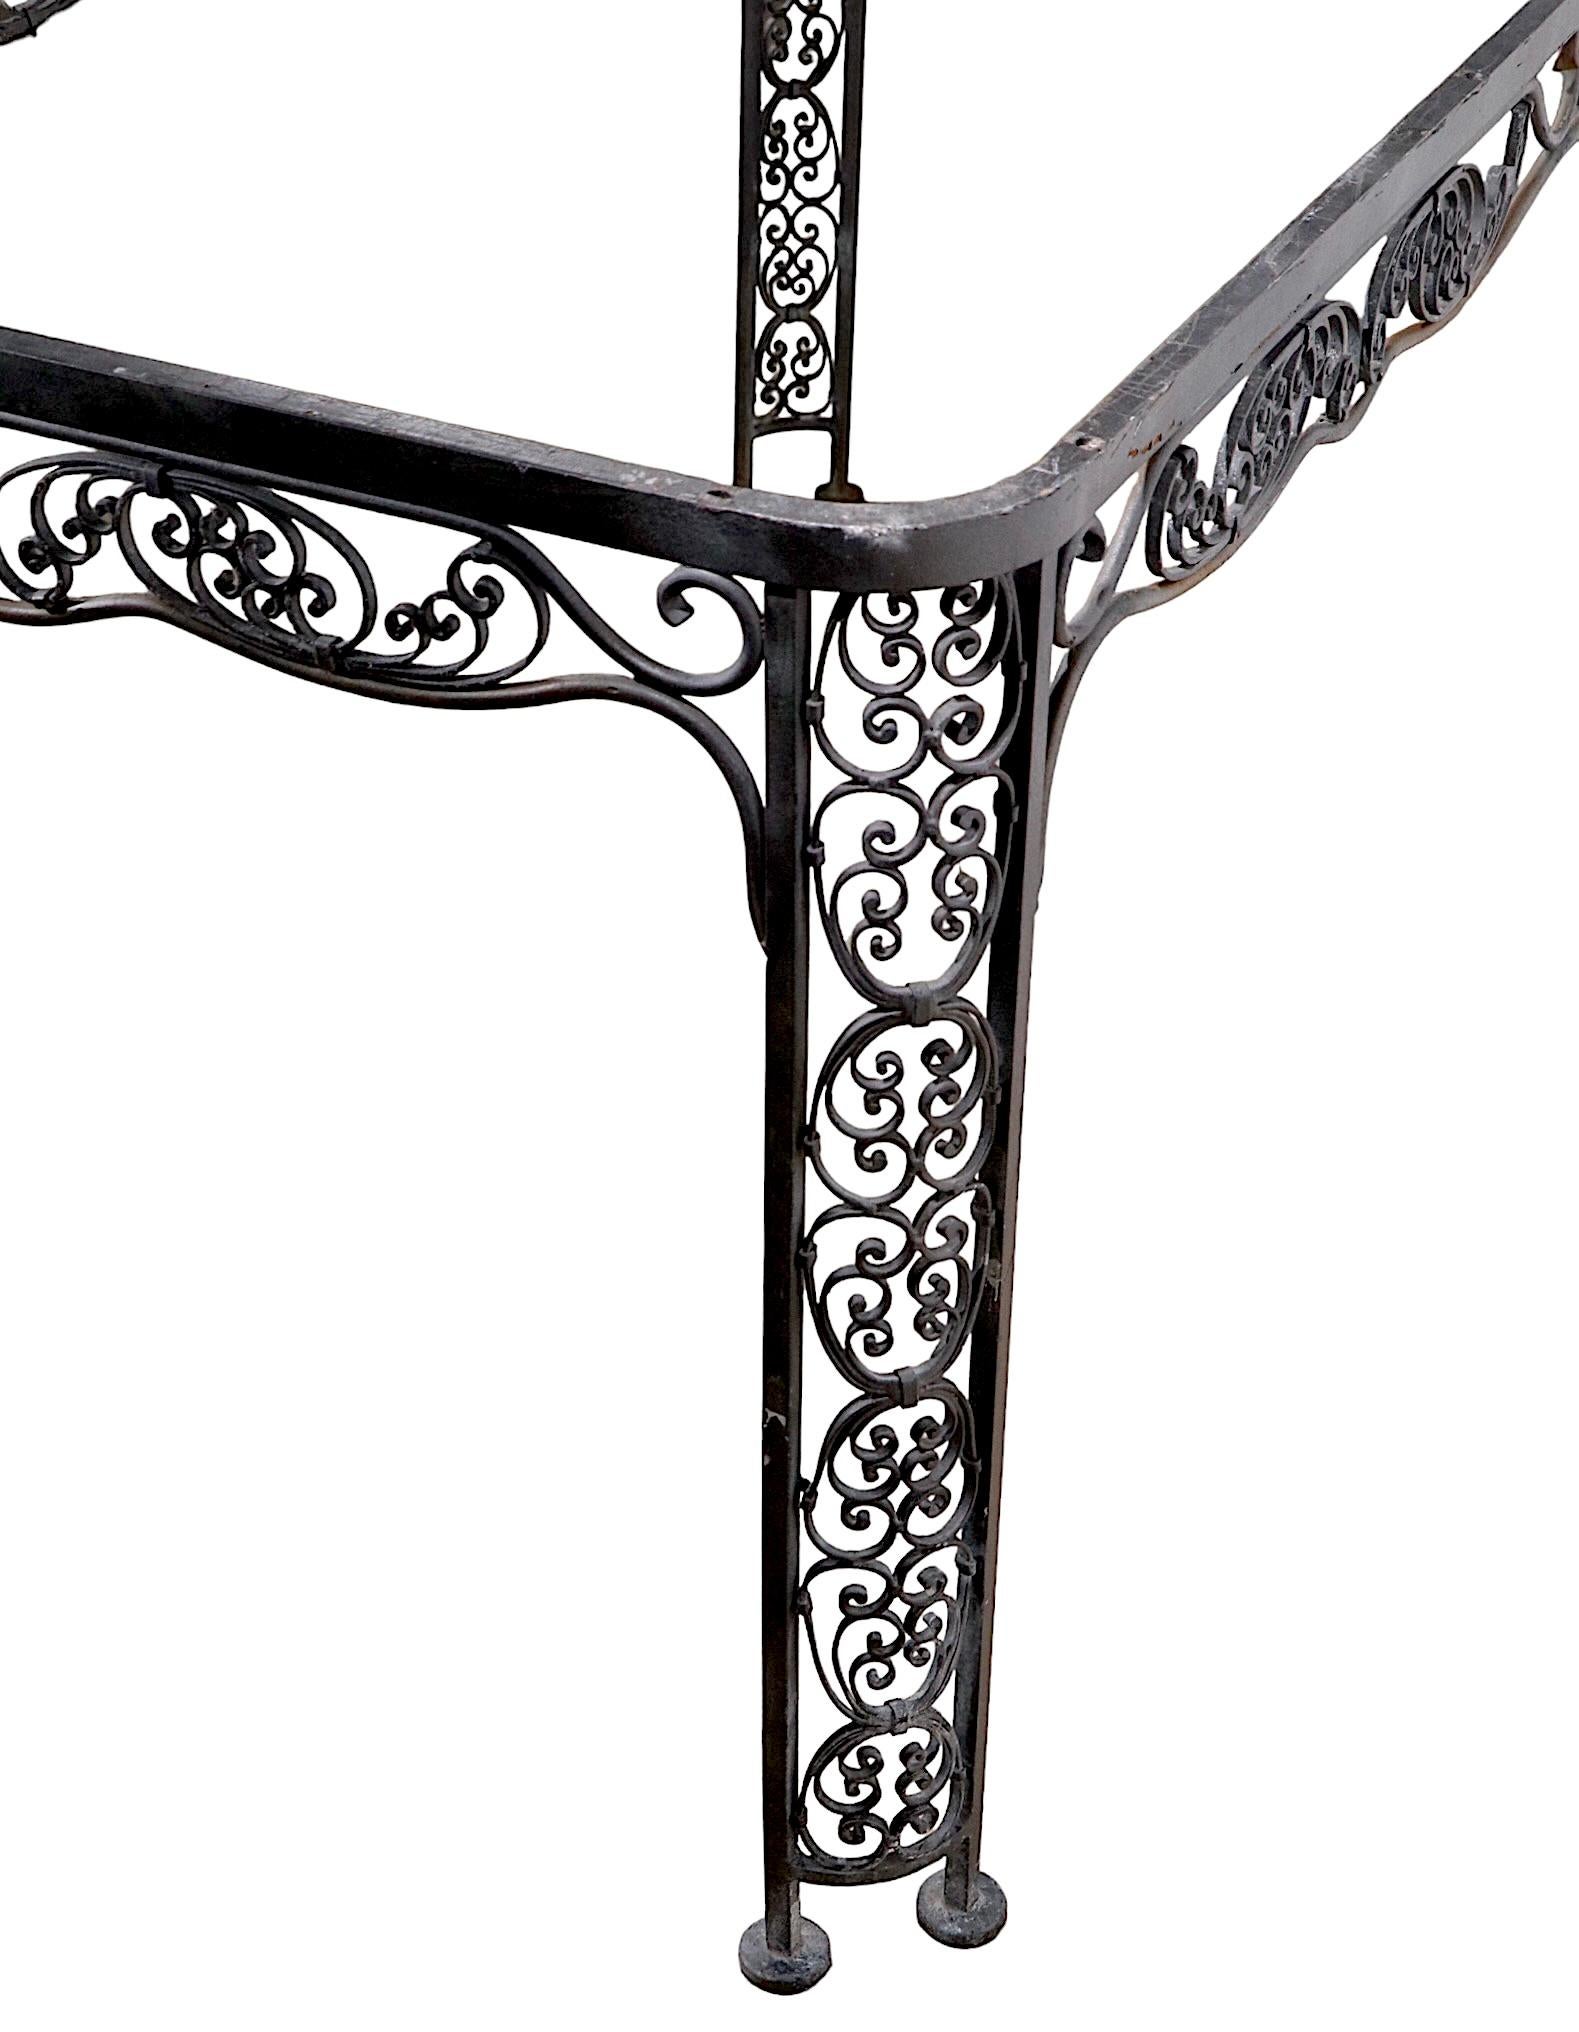 Art Deco Ornate Wrought Iron Garden Patio Poolside Dining Table by Lee Woodard, c 1940's For Sale